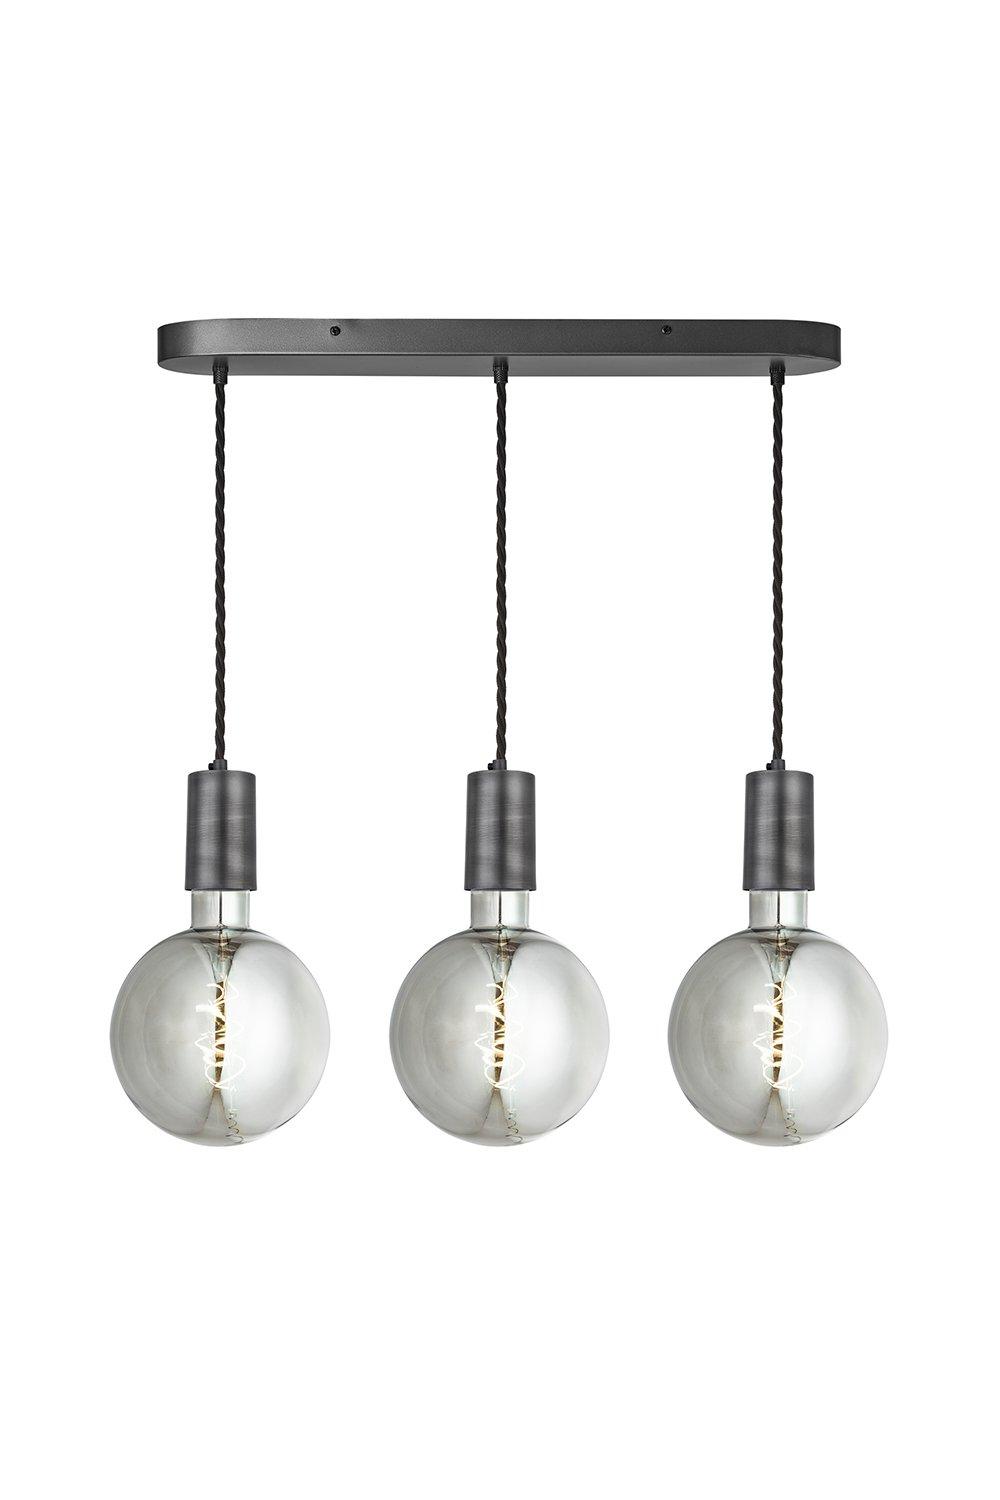 Sleek Large Edison Oval Cluster Lights, 3 Wire - Pewter